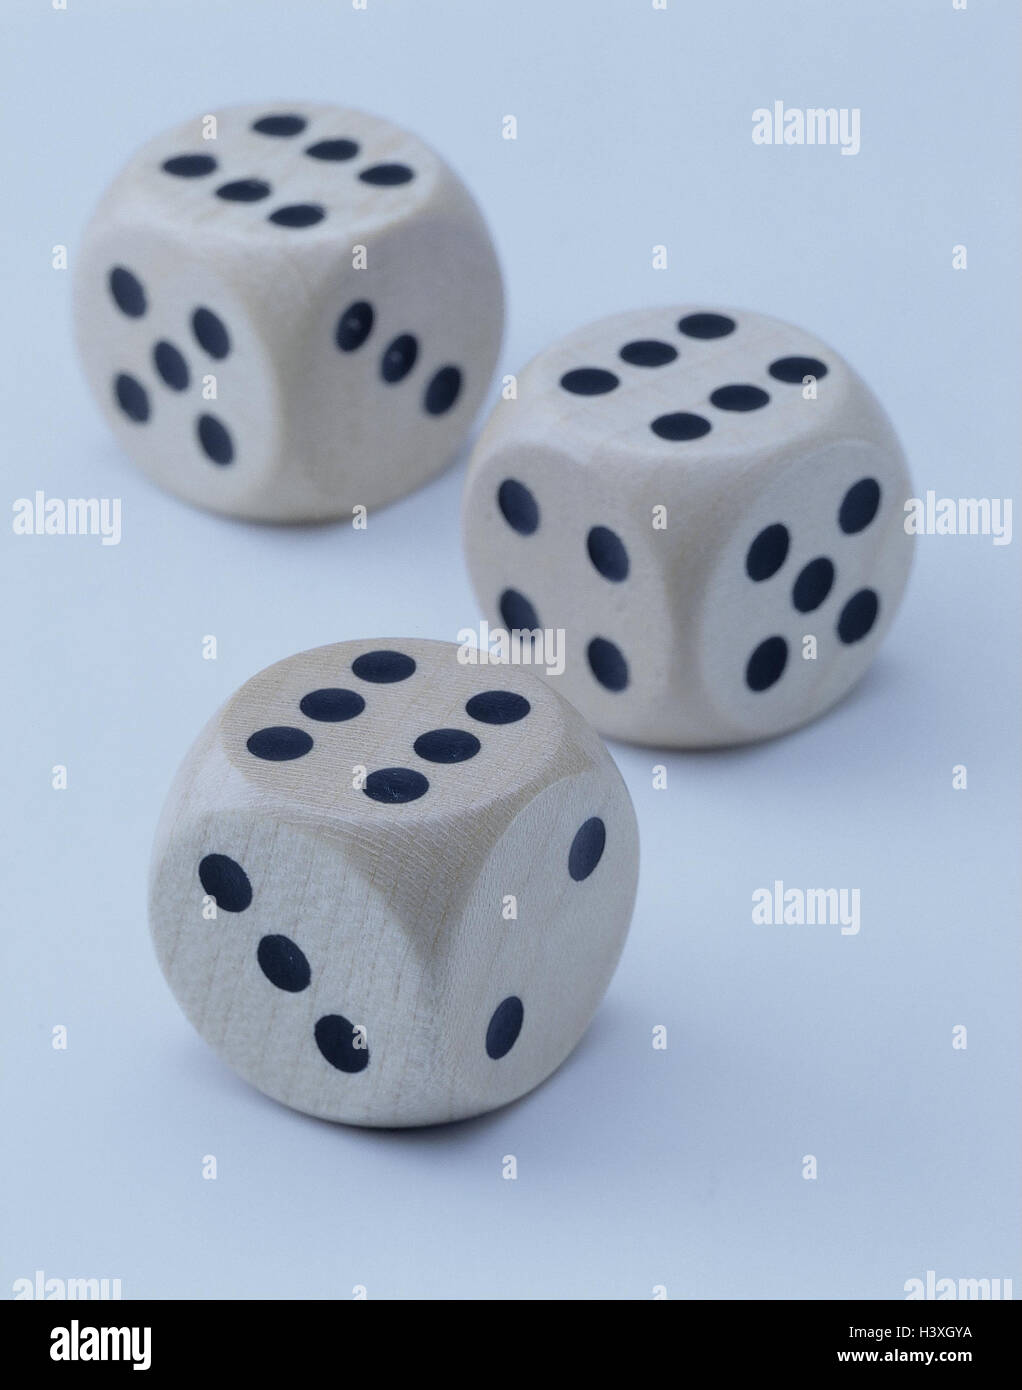 Cubes, three, Pasch, craps, throw dice, game chance, craps, profit, success, decision, Sechser Pasch, Sechsen, game cube, game, luck, chance, product photography, Still life, studio Stock Photo